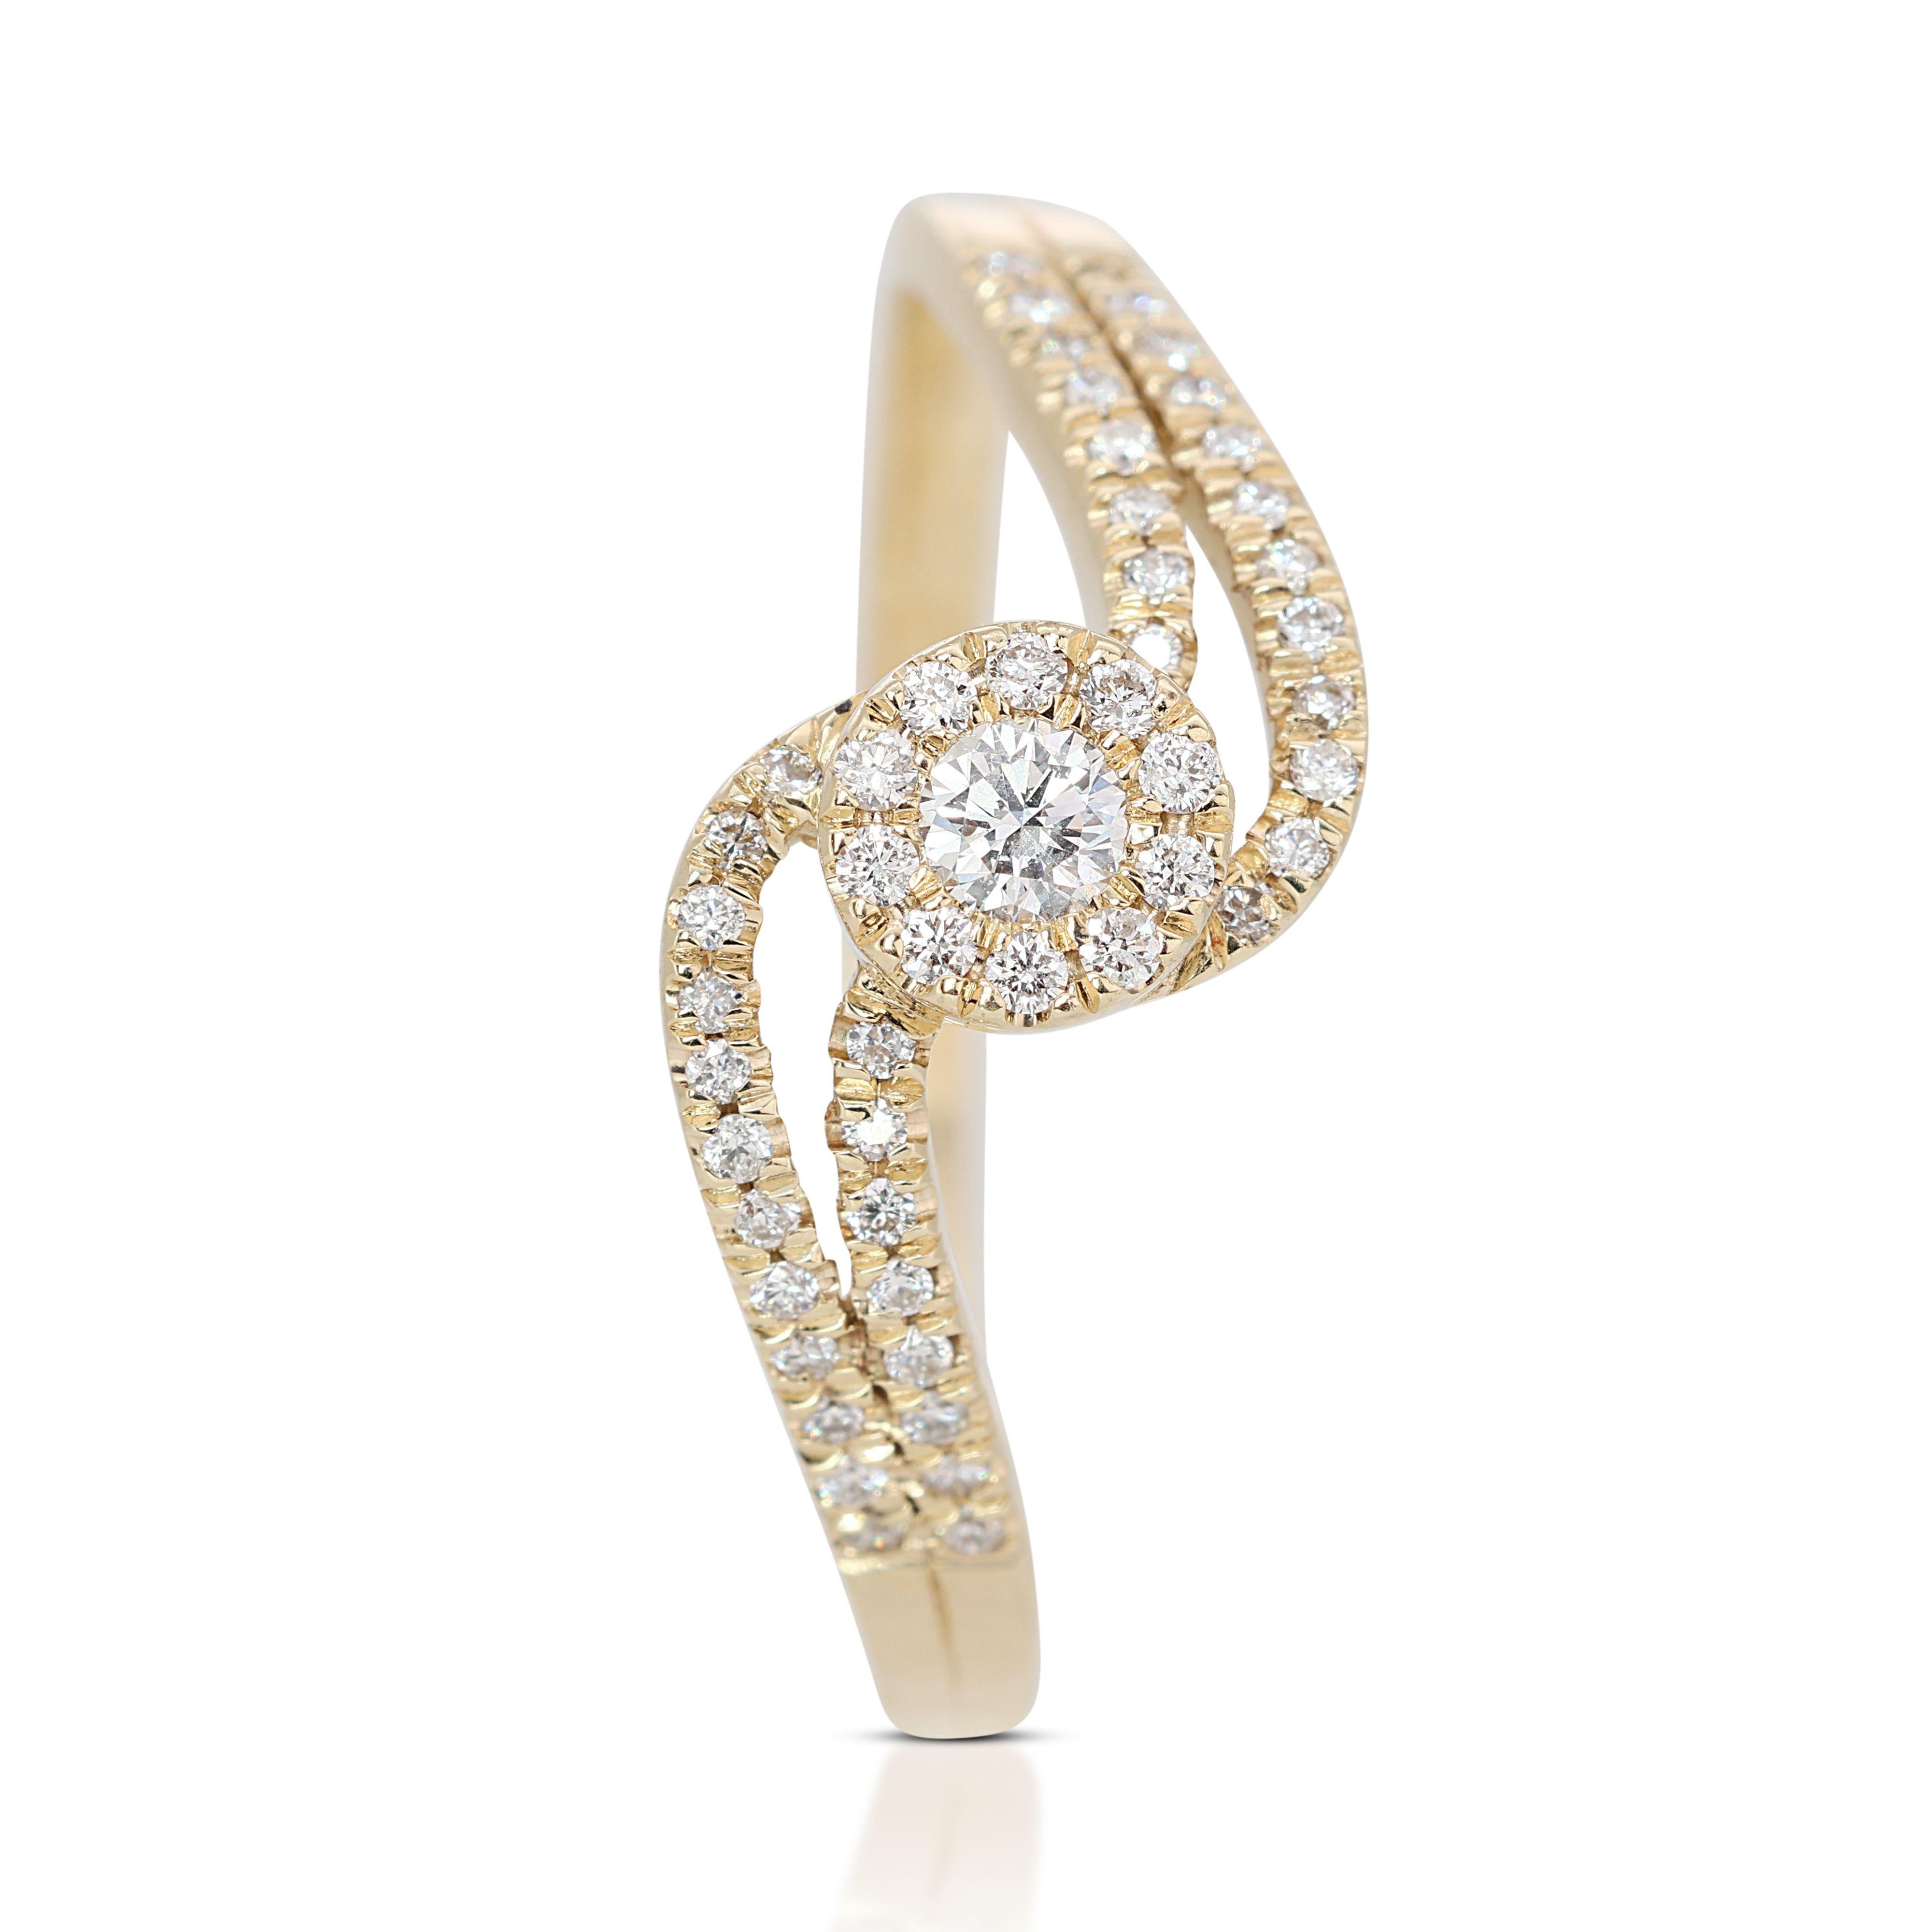 Sparkling Curve Design 14k Yellow Gold Halo Ring with 0.07 Natural Diamonds For Sale 3